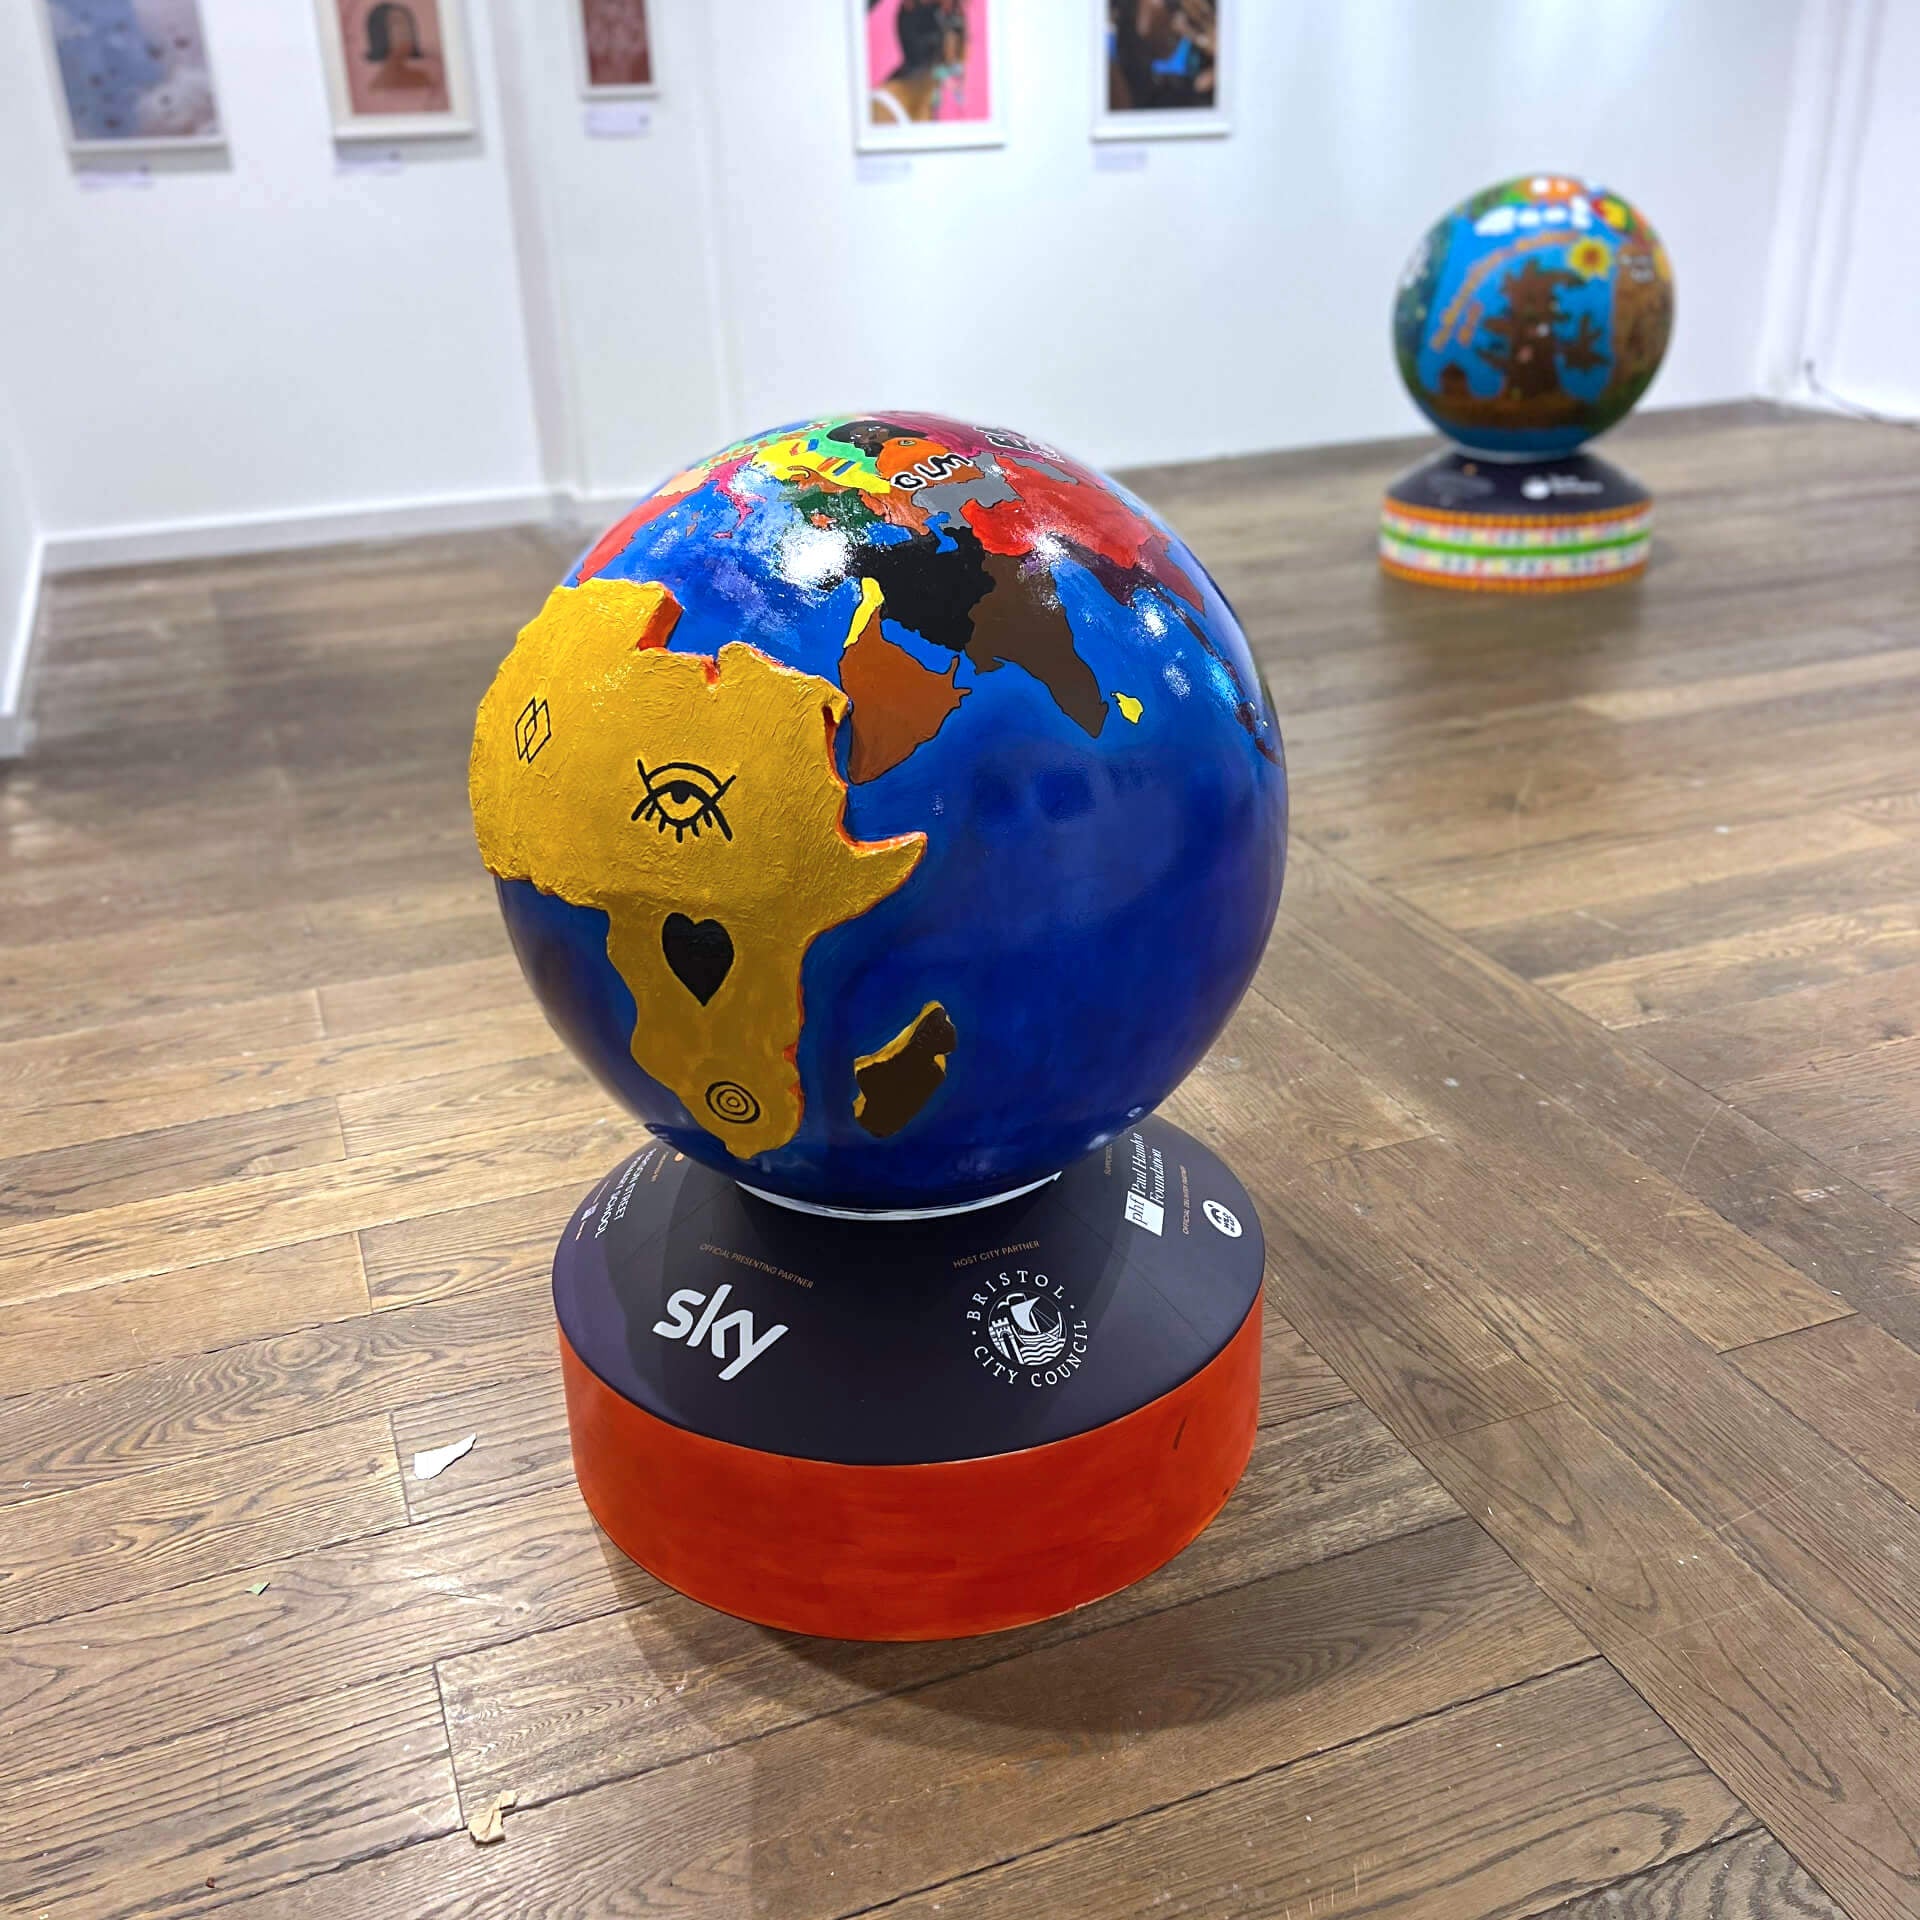 Hand painted globe of the world - painted by local school children - focusing on Africa